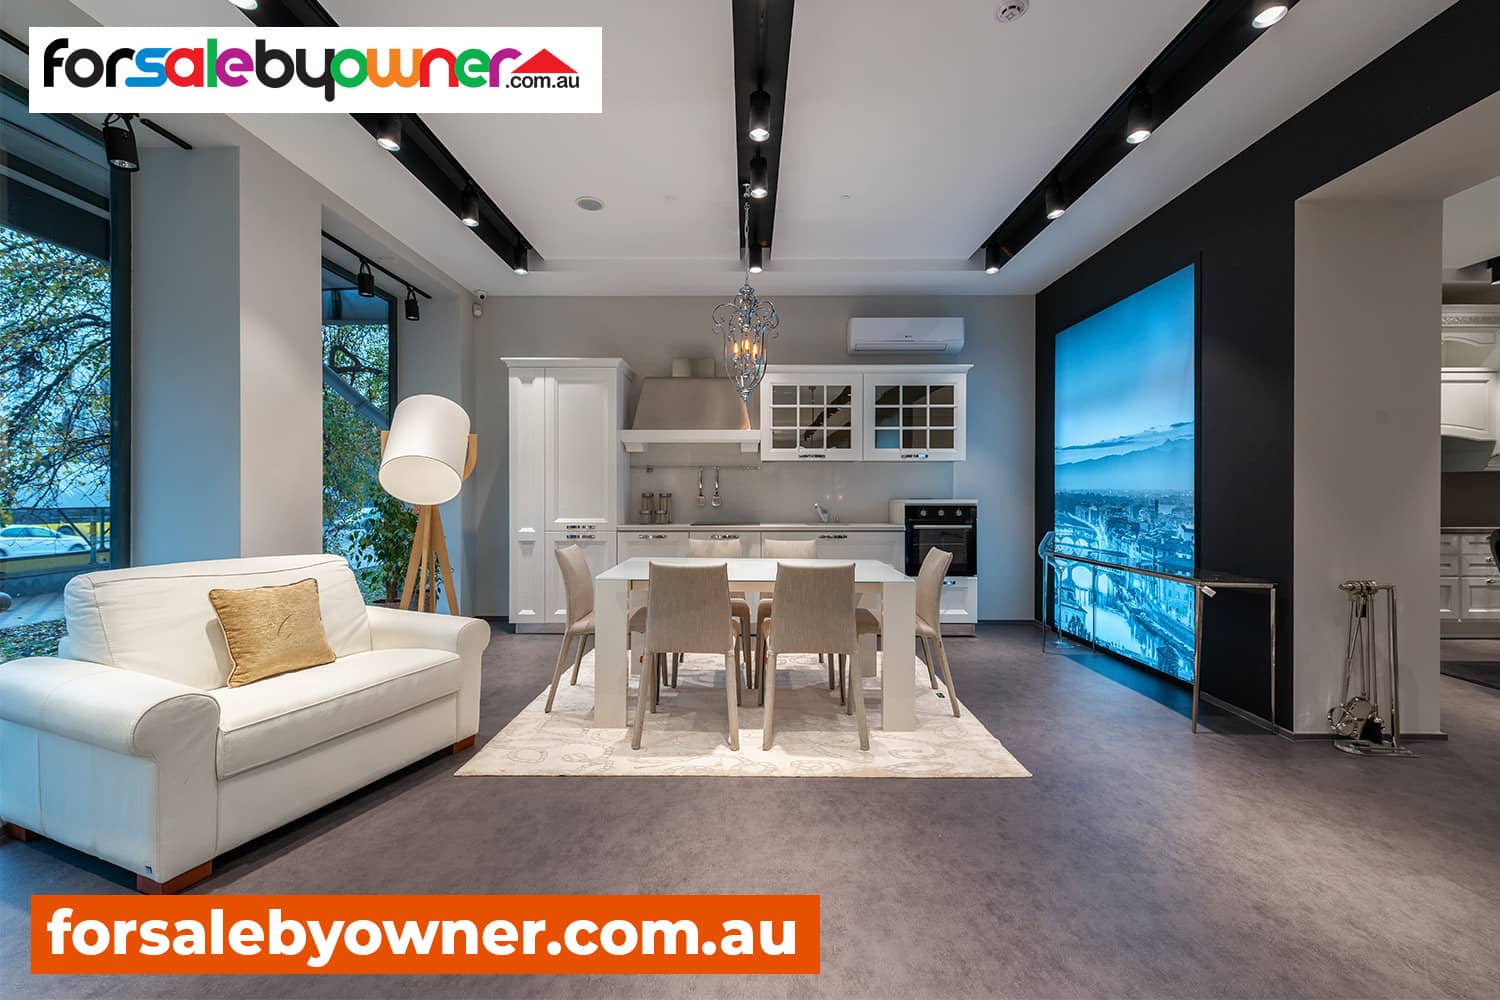 For Sale By Owner NSW | Sell My House New South Wales